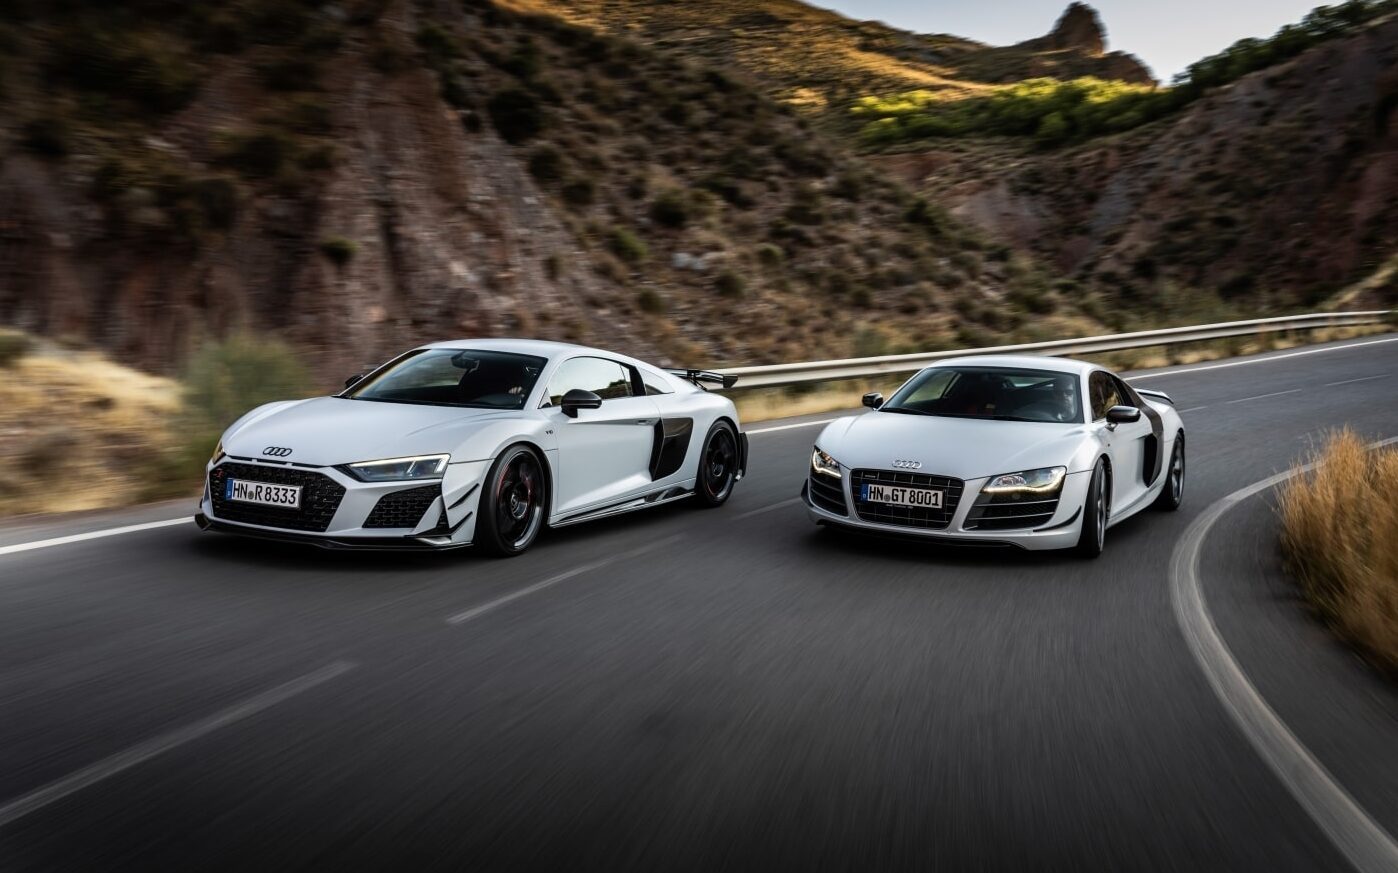 Audi unveils its last car to feature V10, the R8 GT - VelocityNews